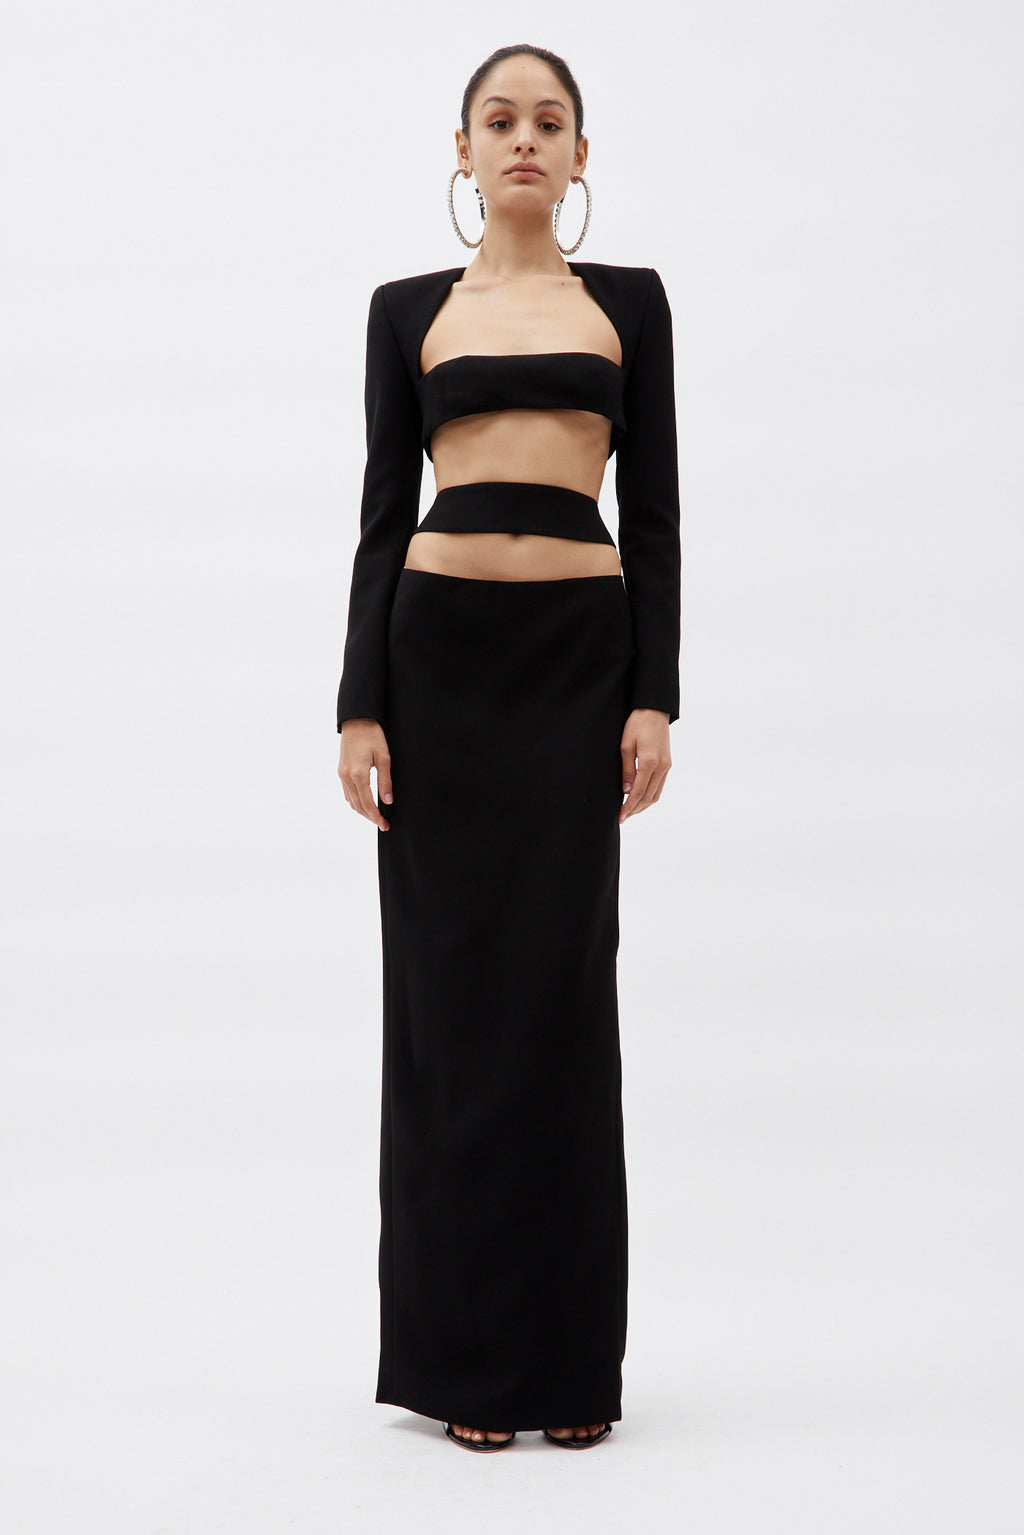 Long Black Skirt With Cut Out